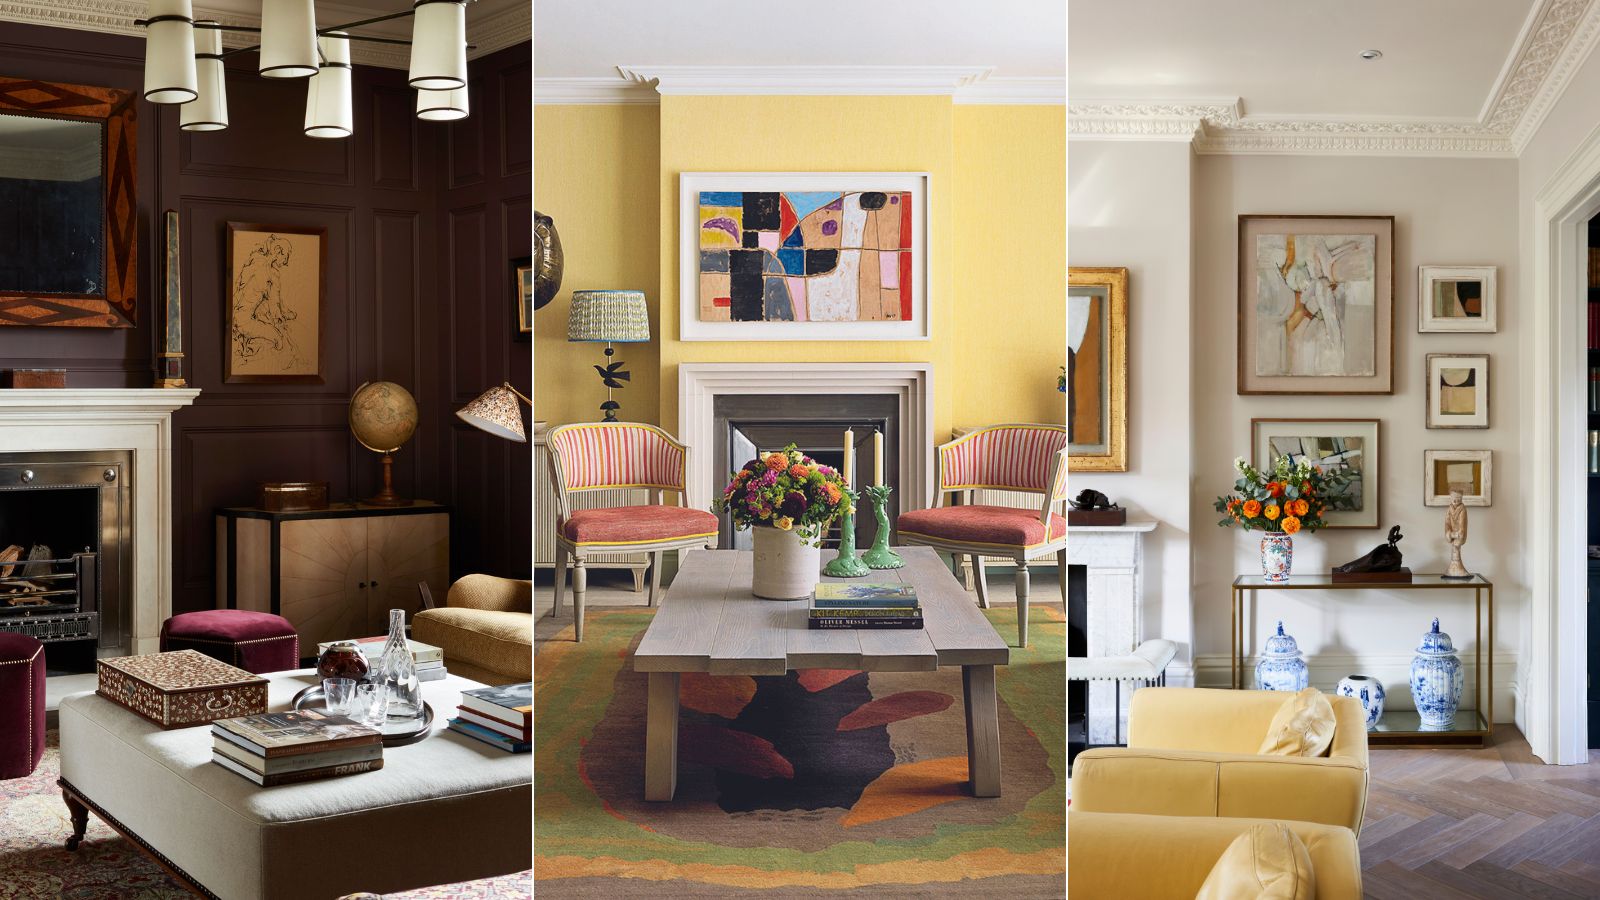 Living Room Color Ideas: 15 Color Schemes To Inspire |